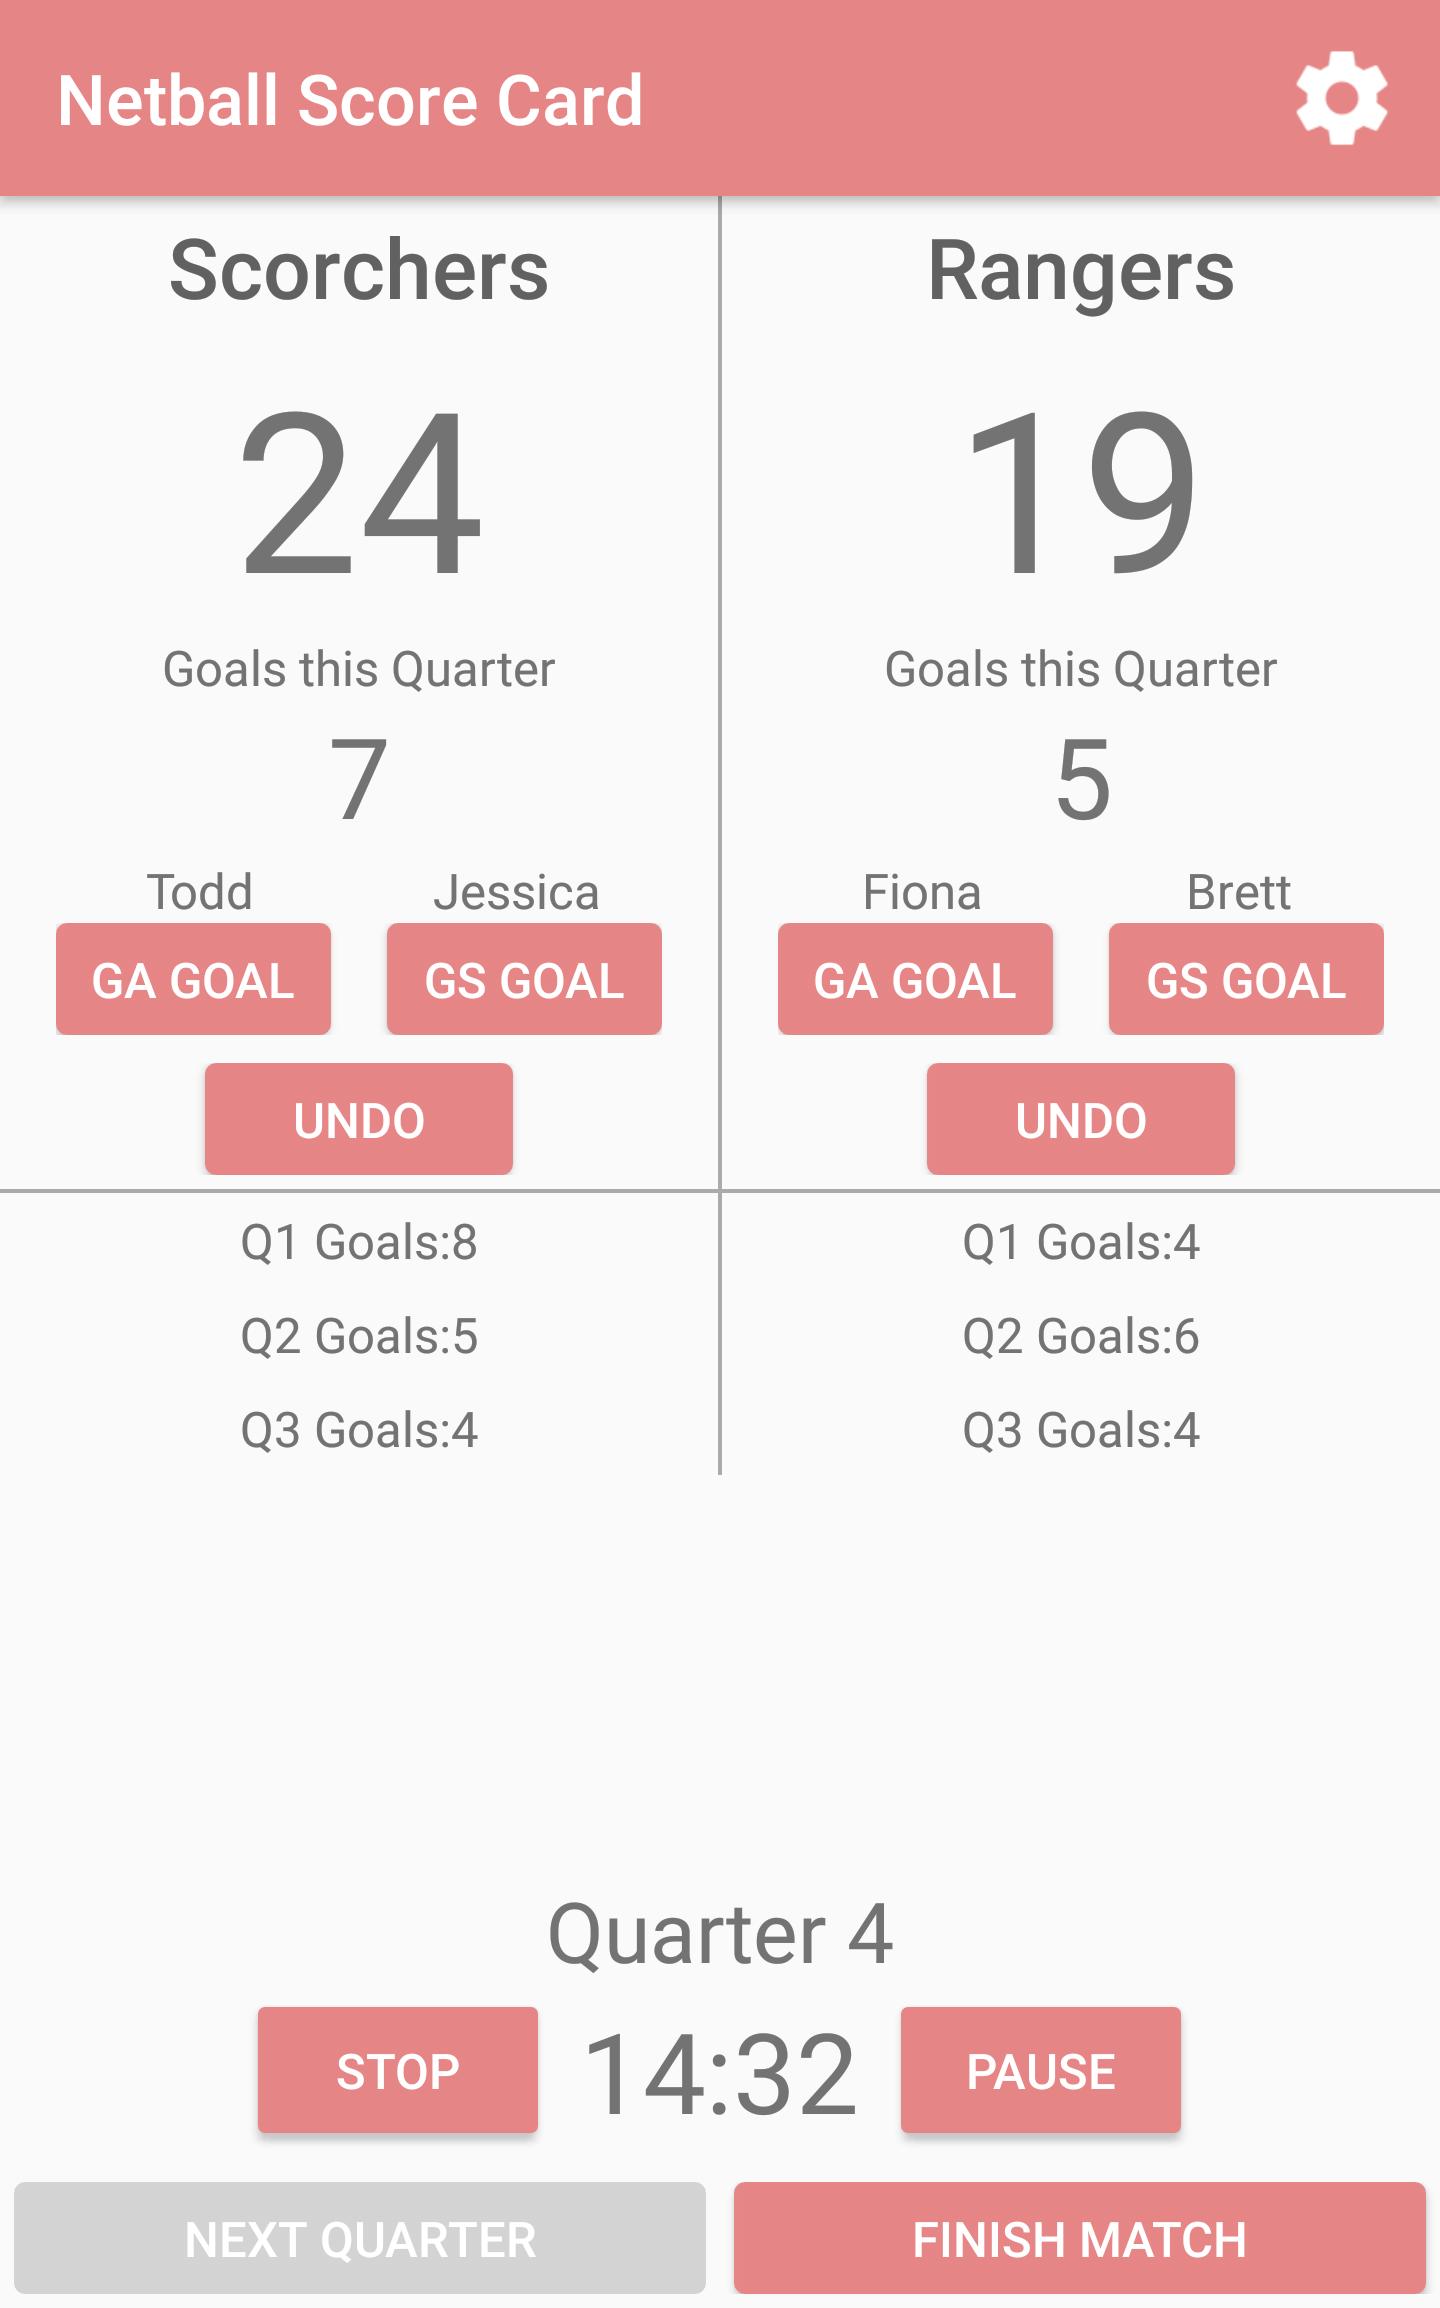 netball-score-card-apk-for-android-download